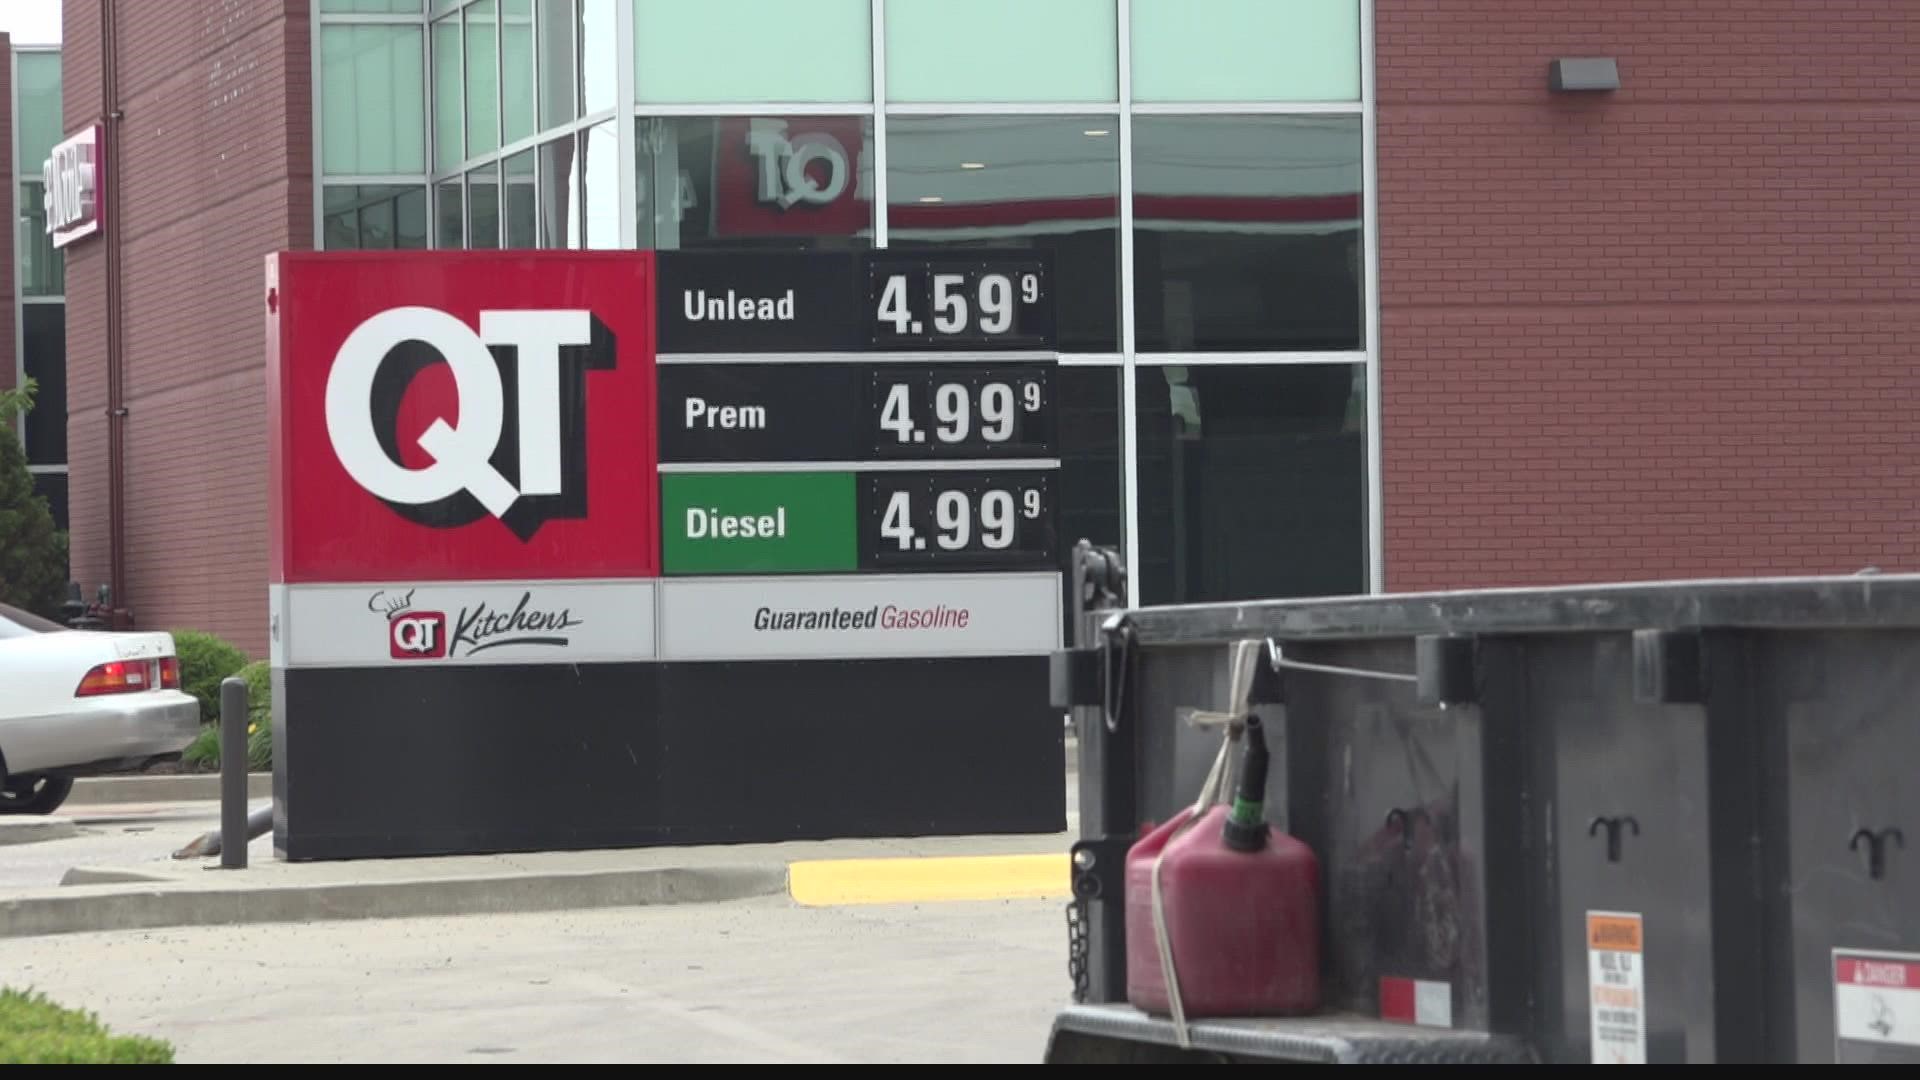 AAA says prices may not decrease until demand goes down. They recommend good driving habits to improve your milage.